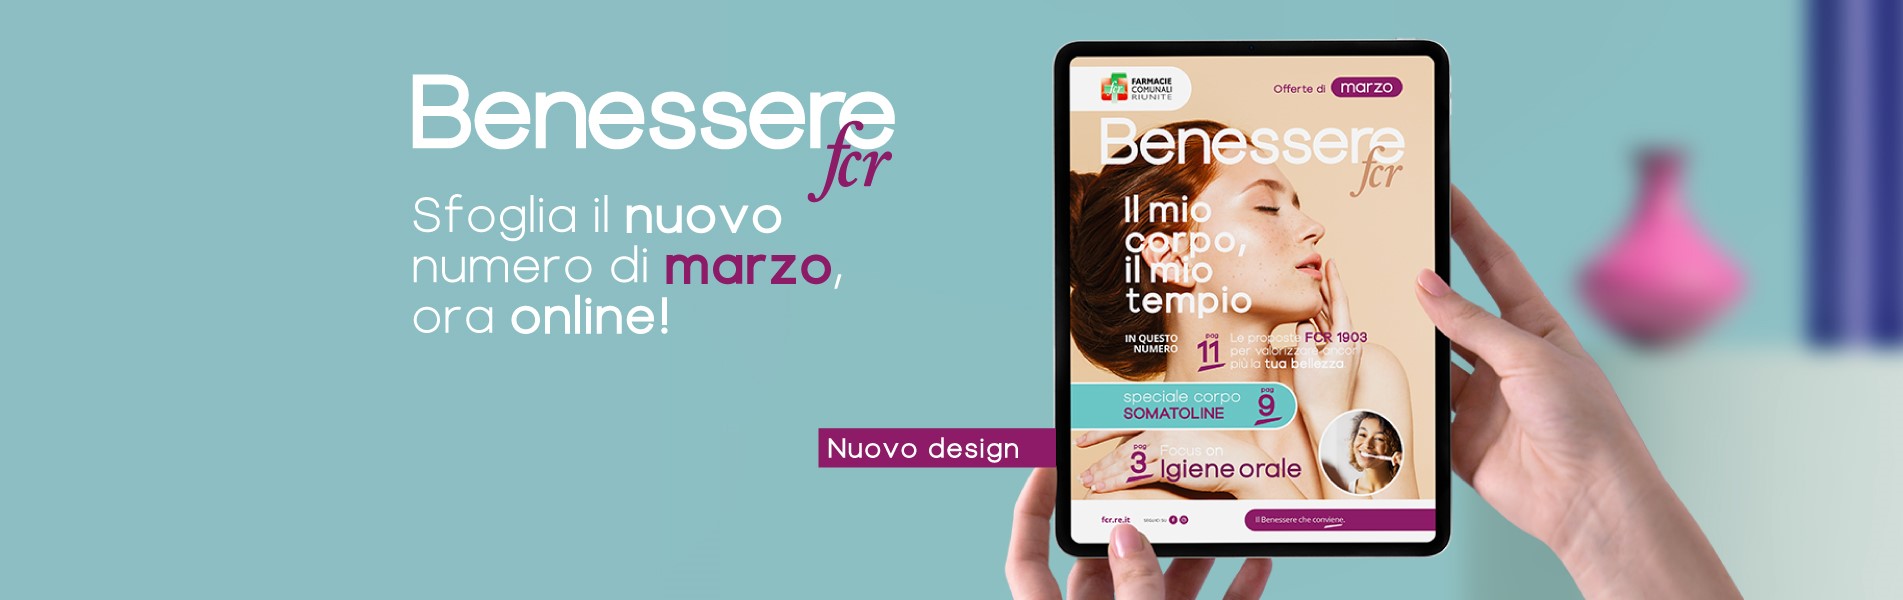 Benessere <br /> FCR